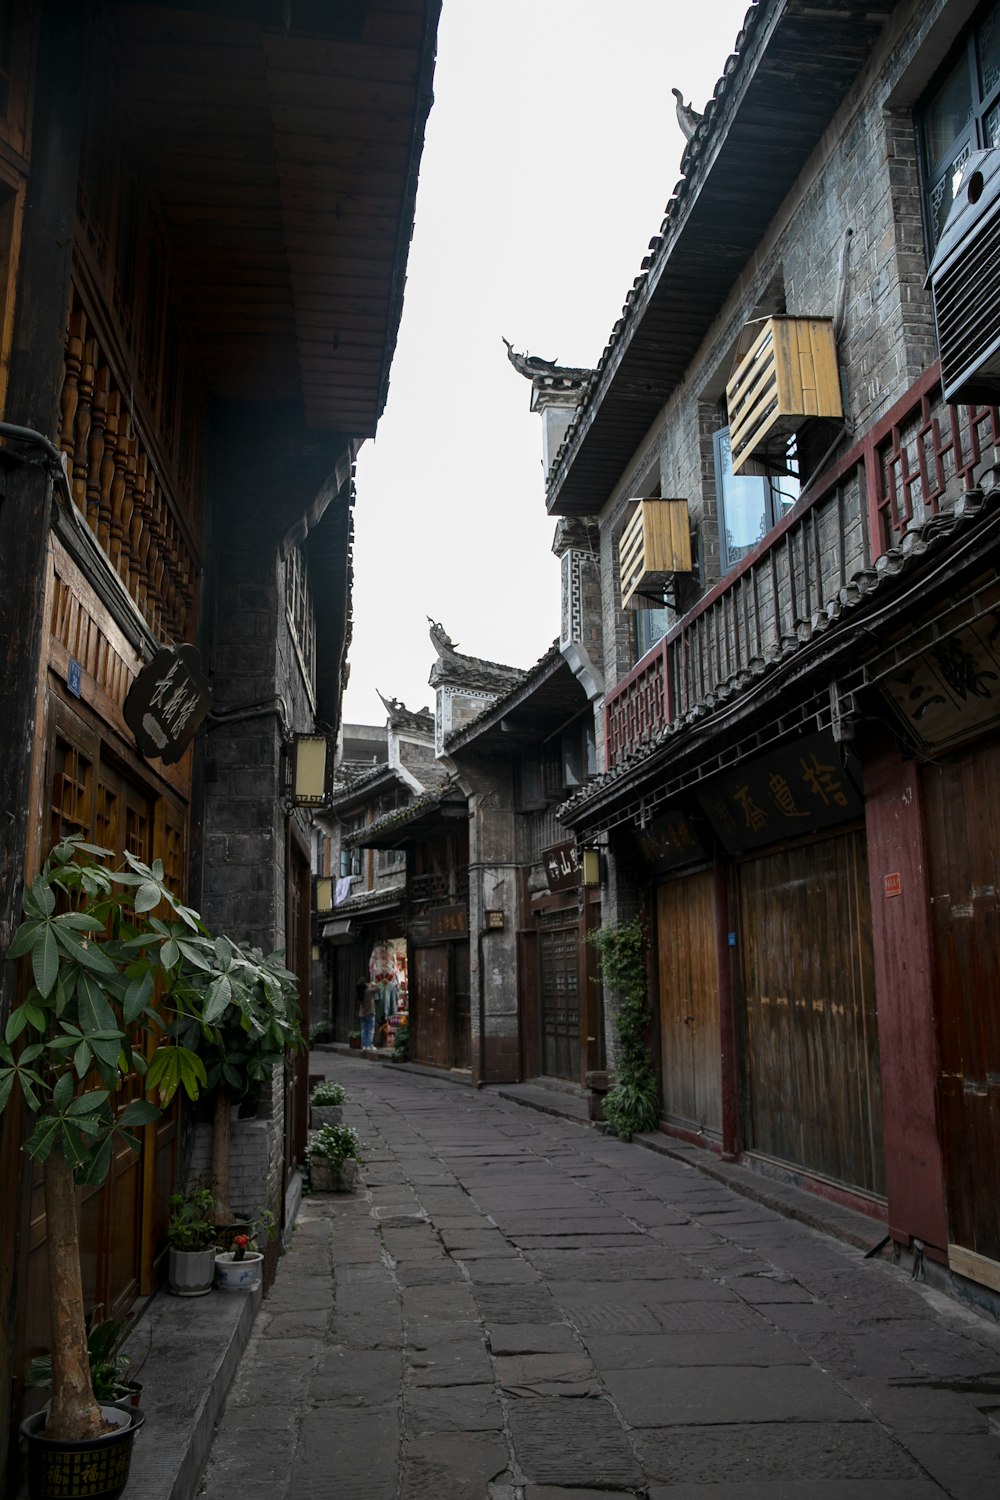 a narrow alley way with wooden buildings on both sides